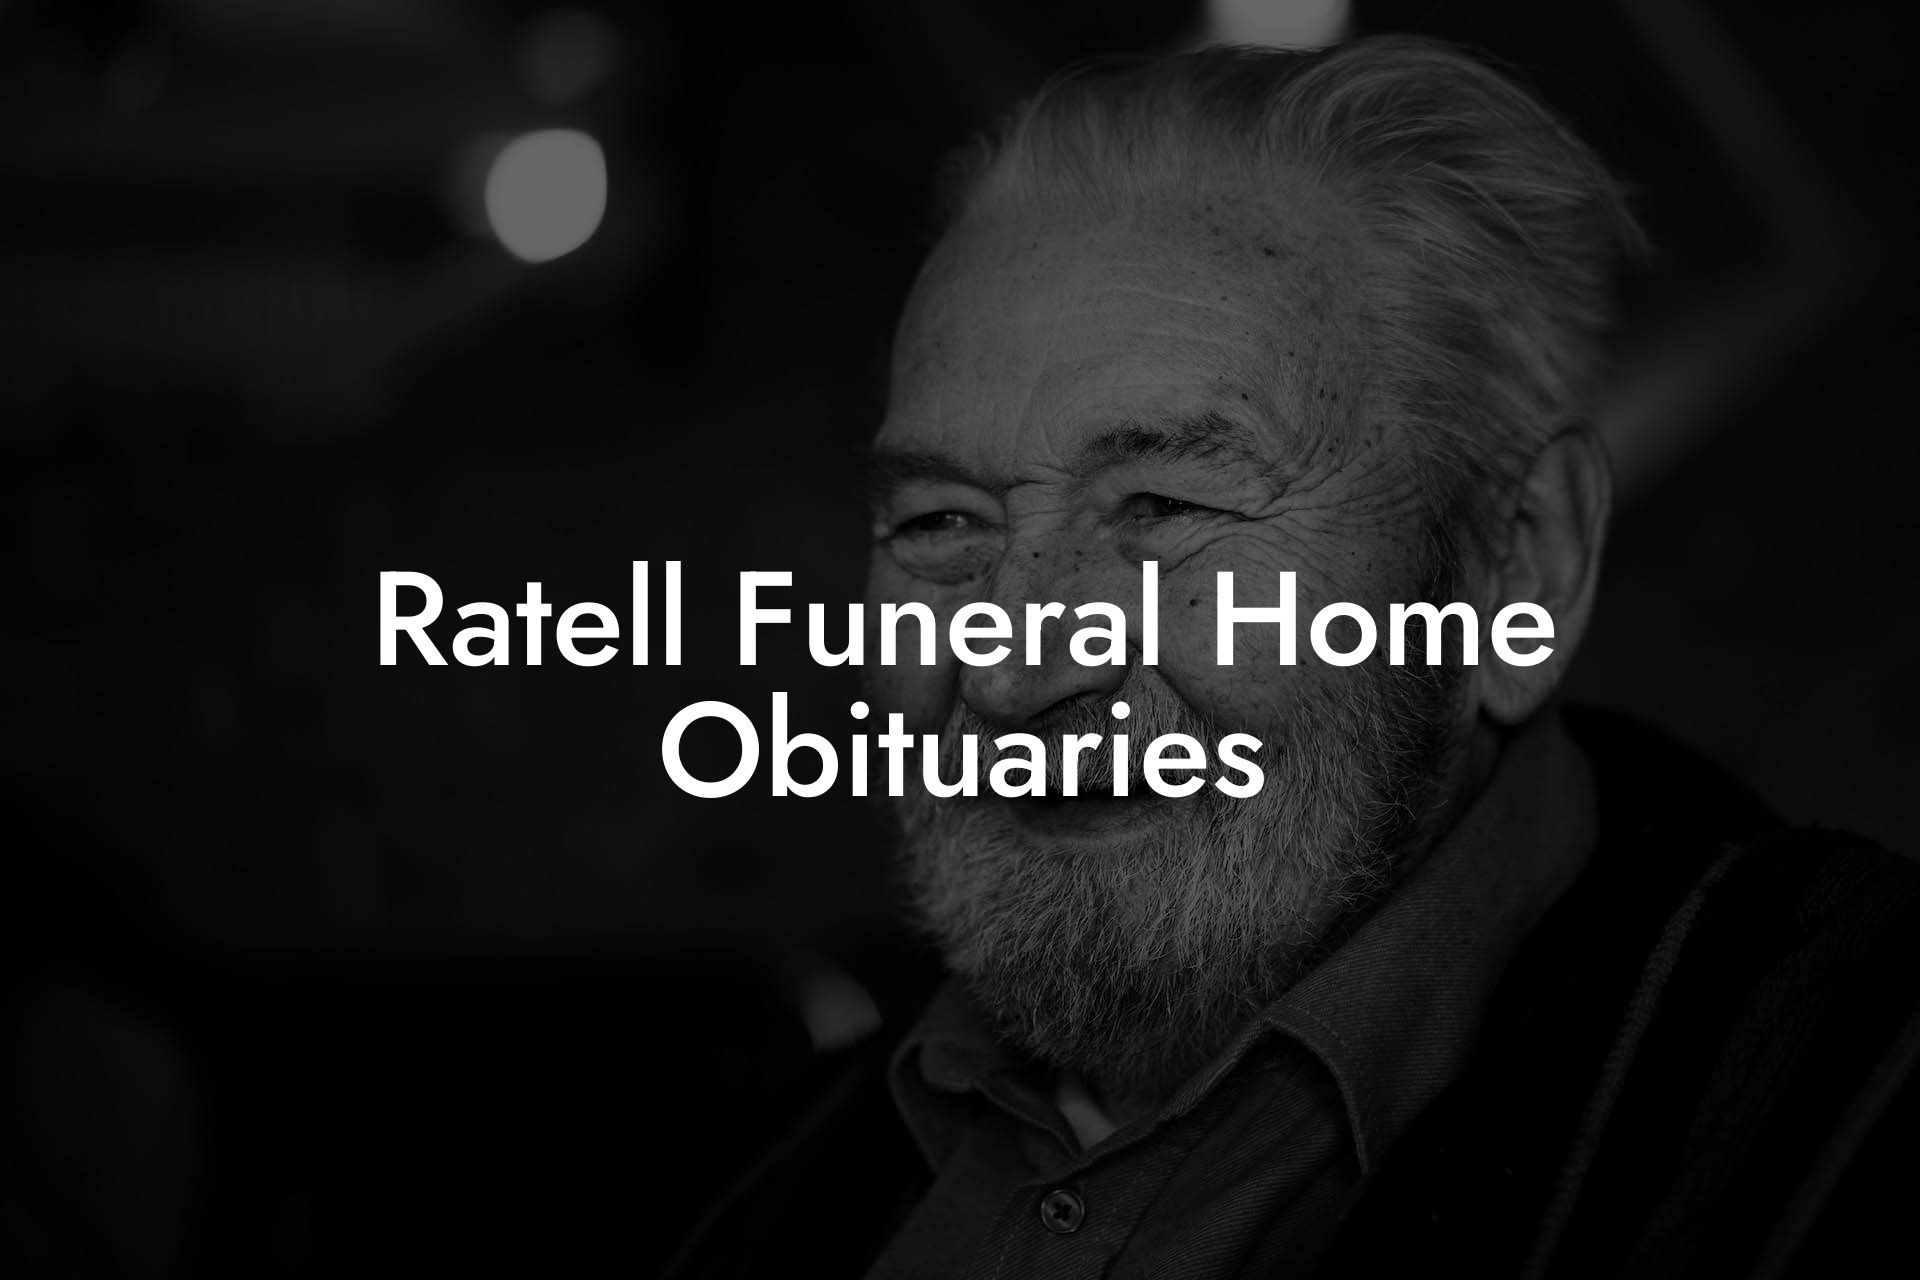 Ratell Funeral Home Obituaries